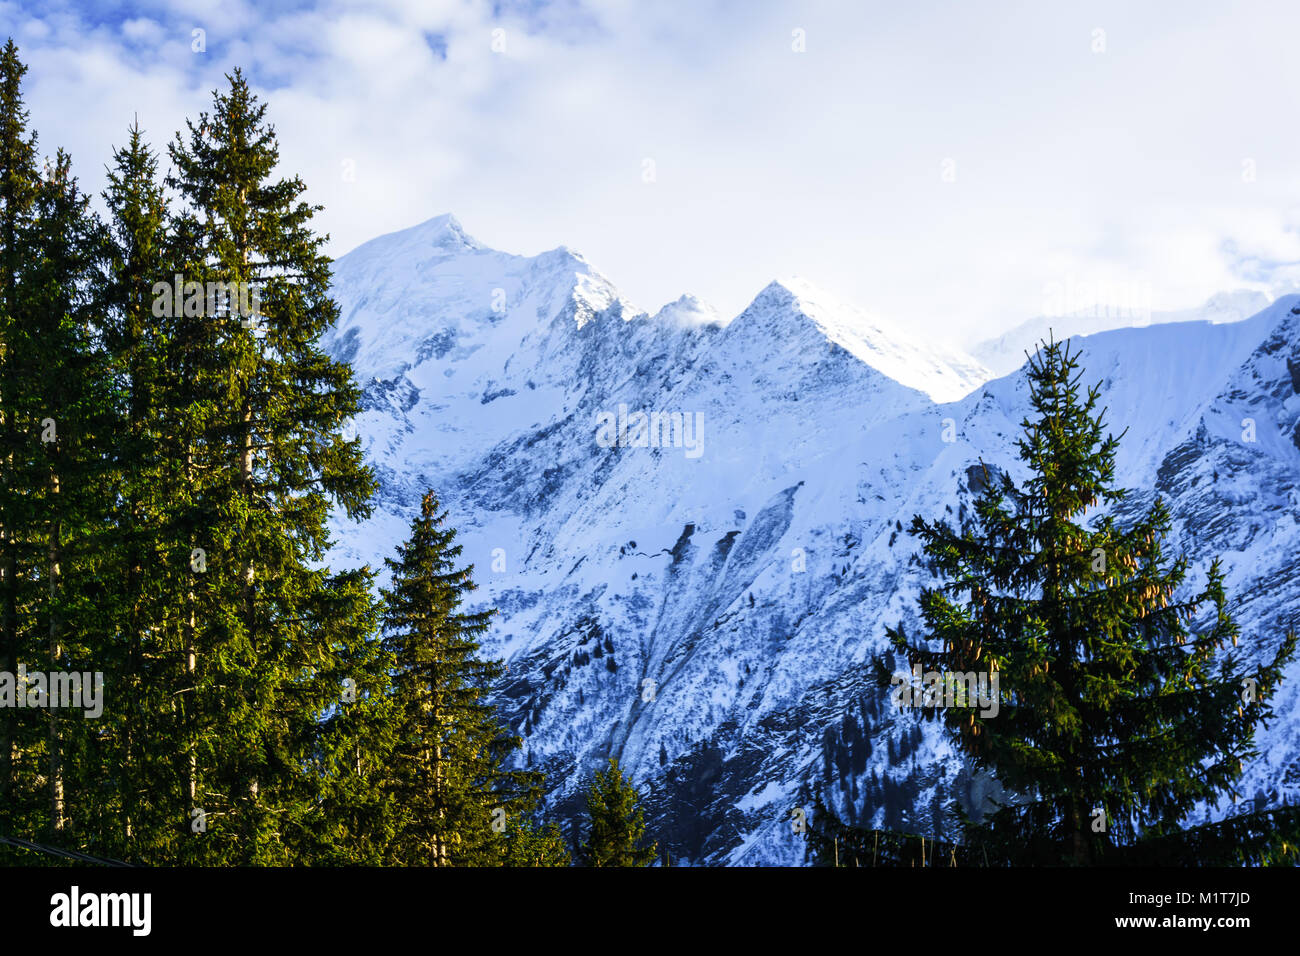 Beautiful landscape of snowy mountain view in Bellvue Saint-Gervais-les-Bains. One of Alps mountaintop near Mont Blanc. Famous place for winter sport Stock Photo